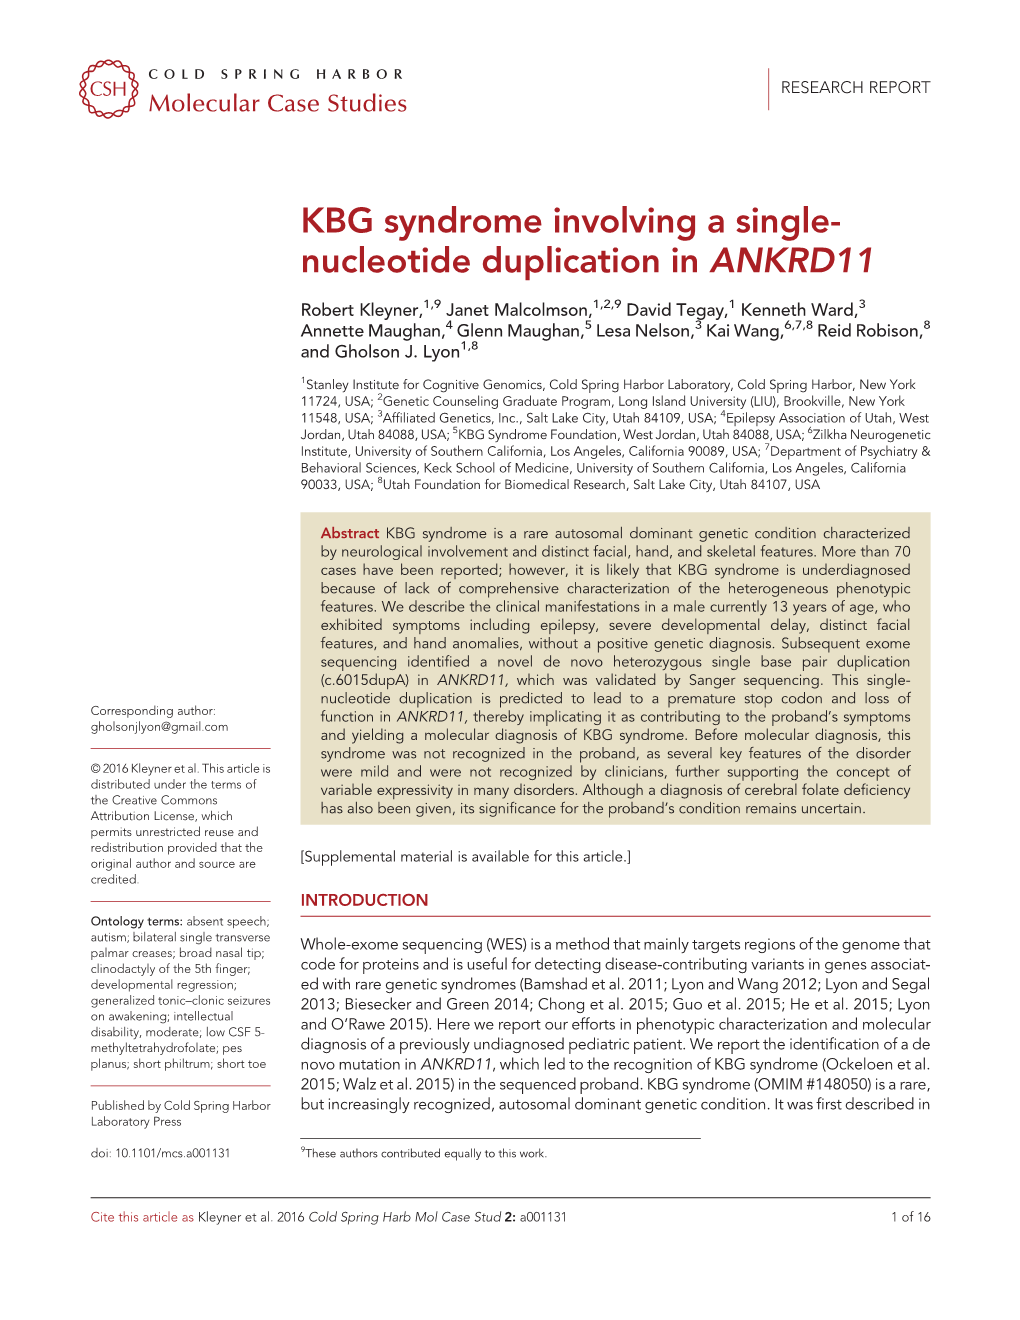 KBG Syndrome Involving a Single- Nucleotide Duplication in ANKRD11